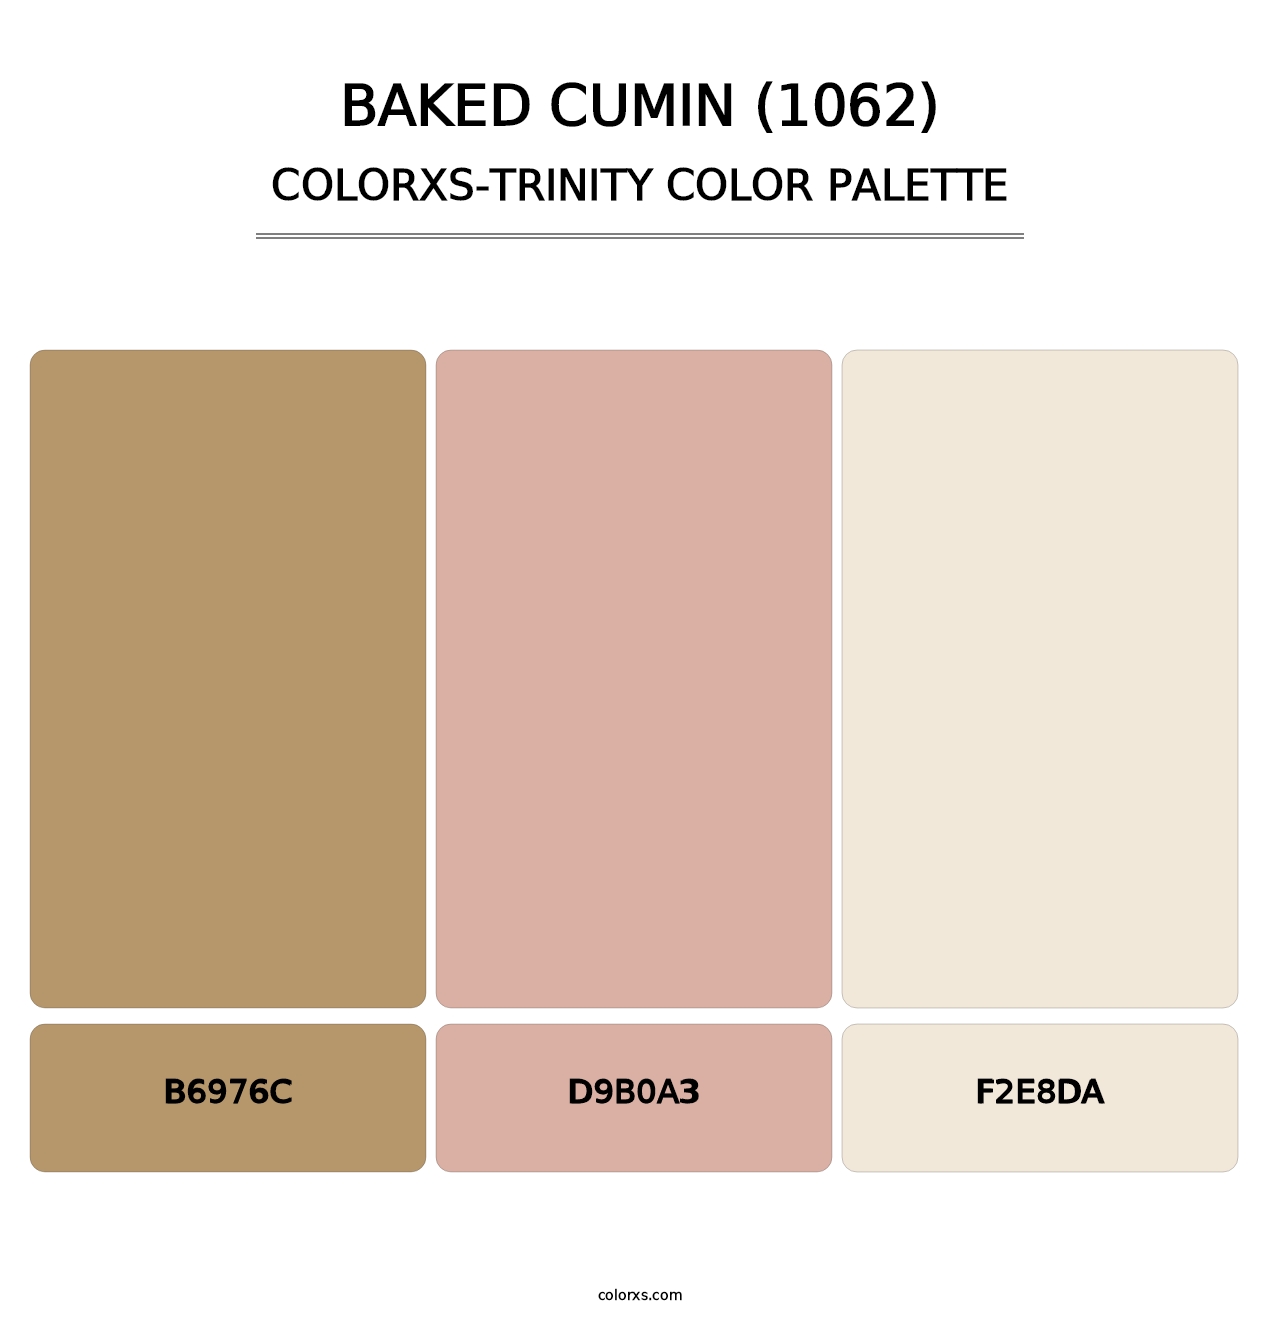 Baked Cumin (1062) - Colorxs Trinity Palette